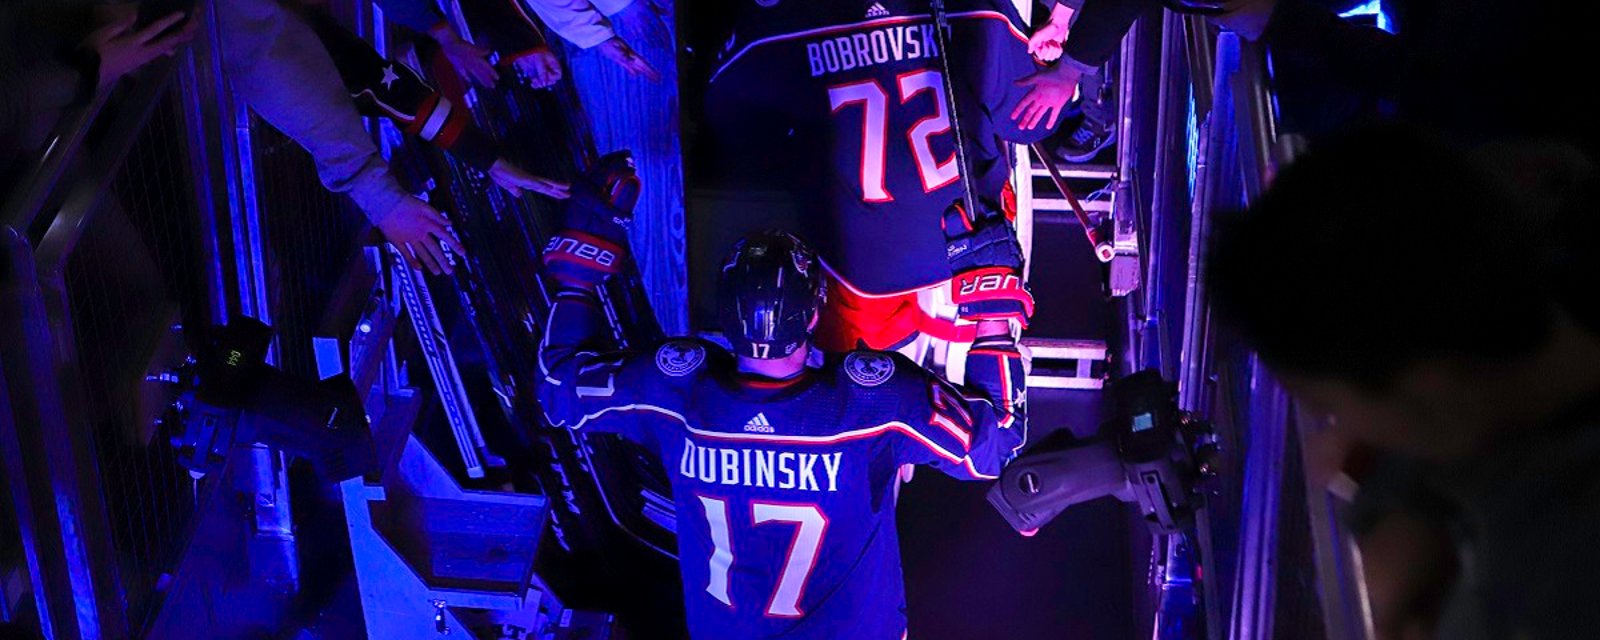 Breaking: Brandon Dubinsky suddenly and mysteriously leaves practice on Monday.